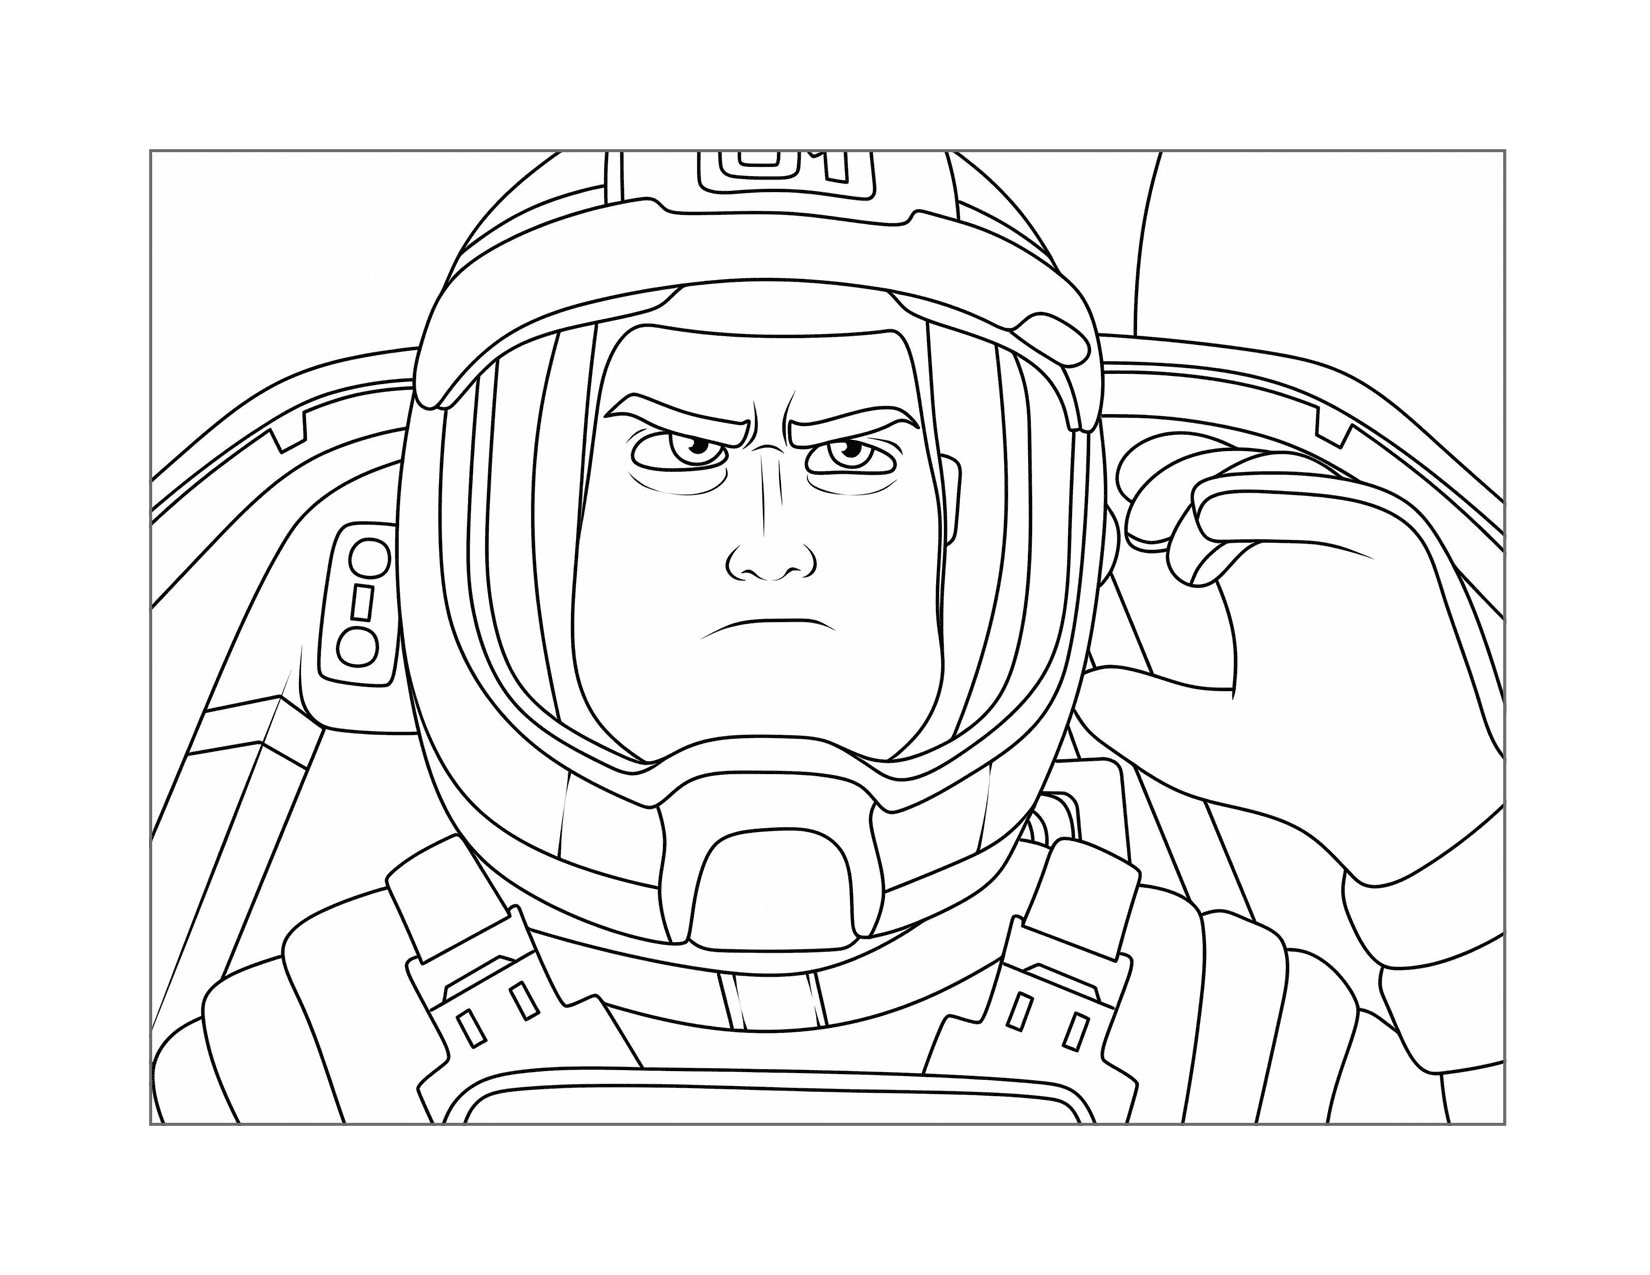 Buzz Lightyear In The Movie Coloring Page